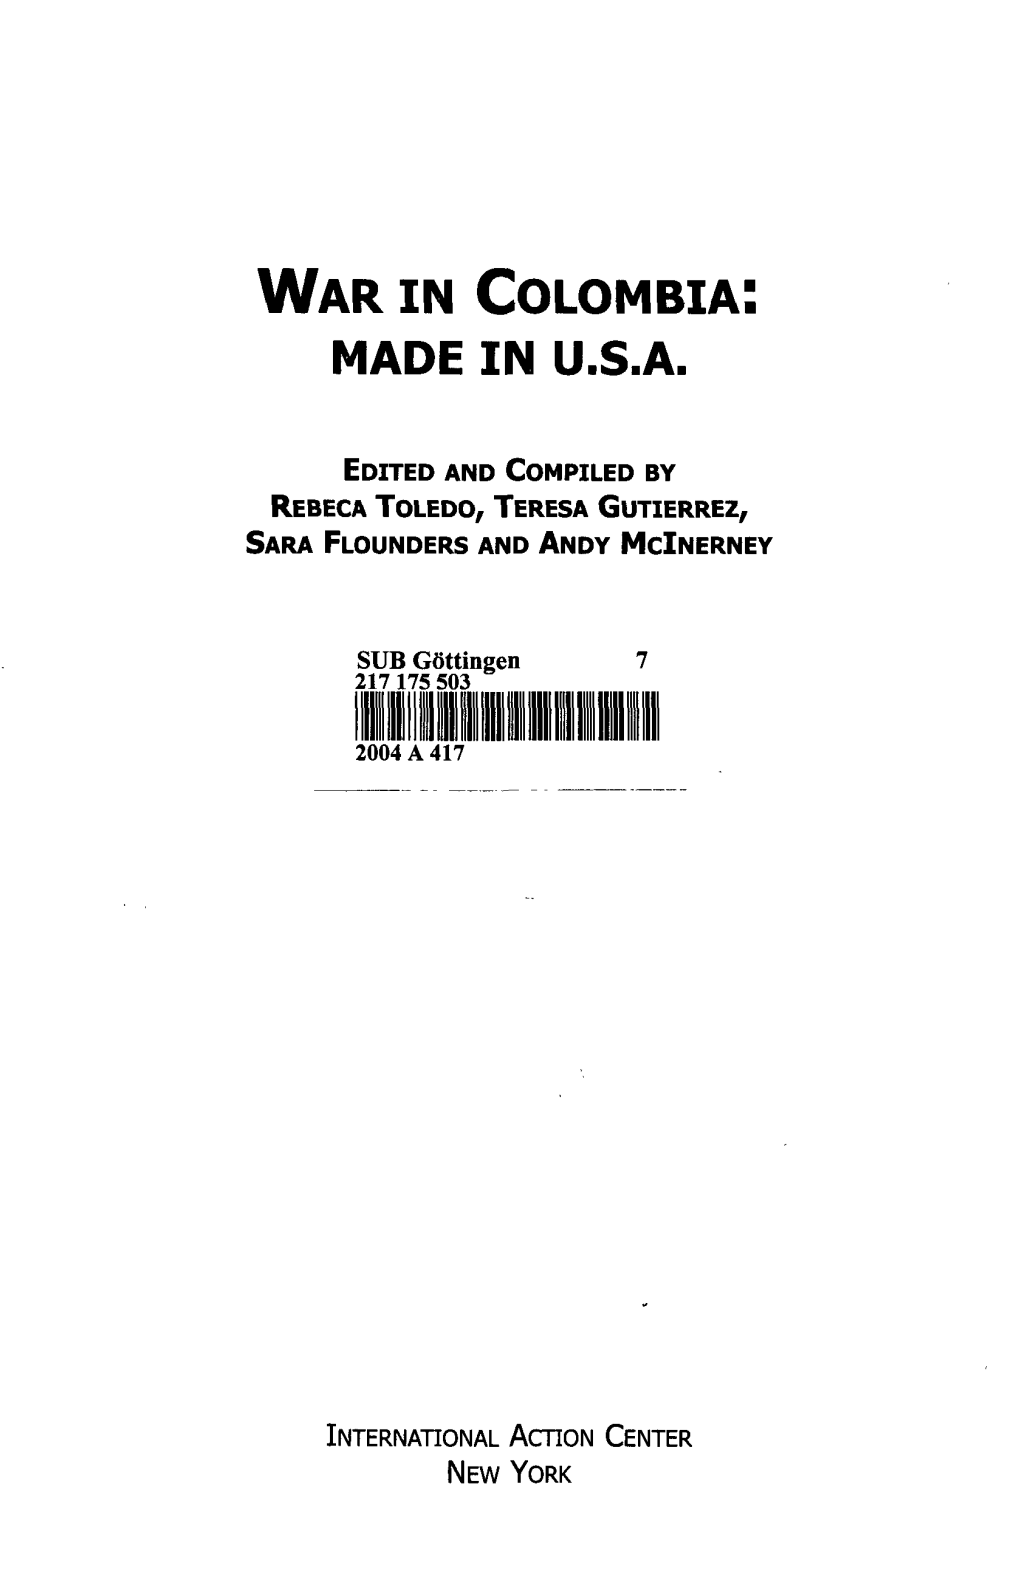 War in Colombia: Made in U.S.A